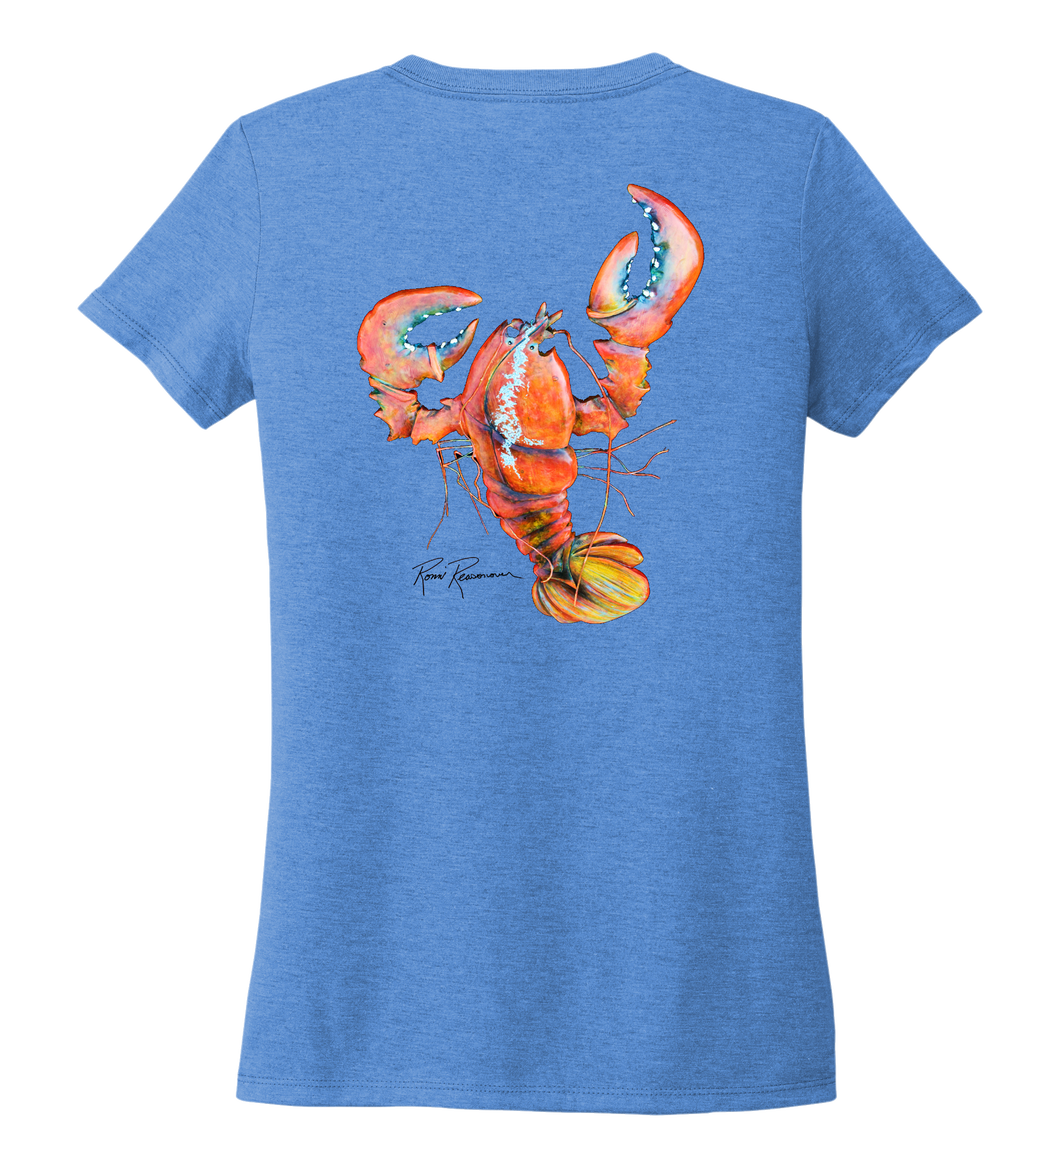 Ronnie Reasonover, The Lobster, Women's V-neck T-shirt in Sky Blue